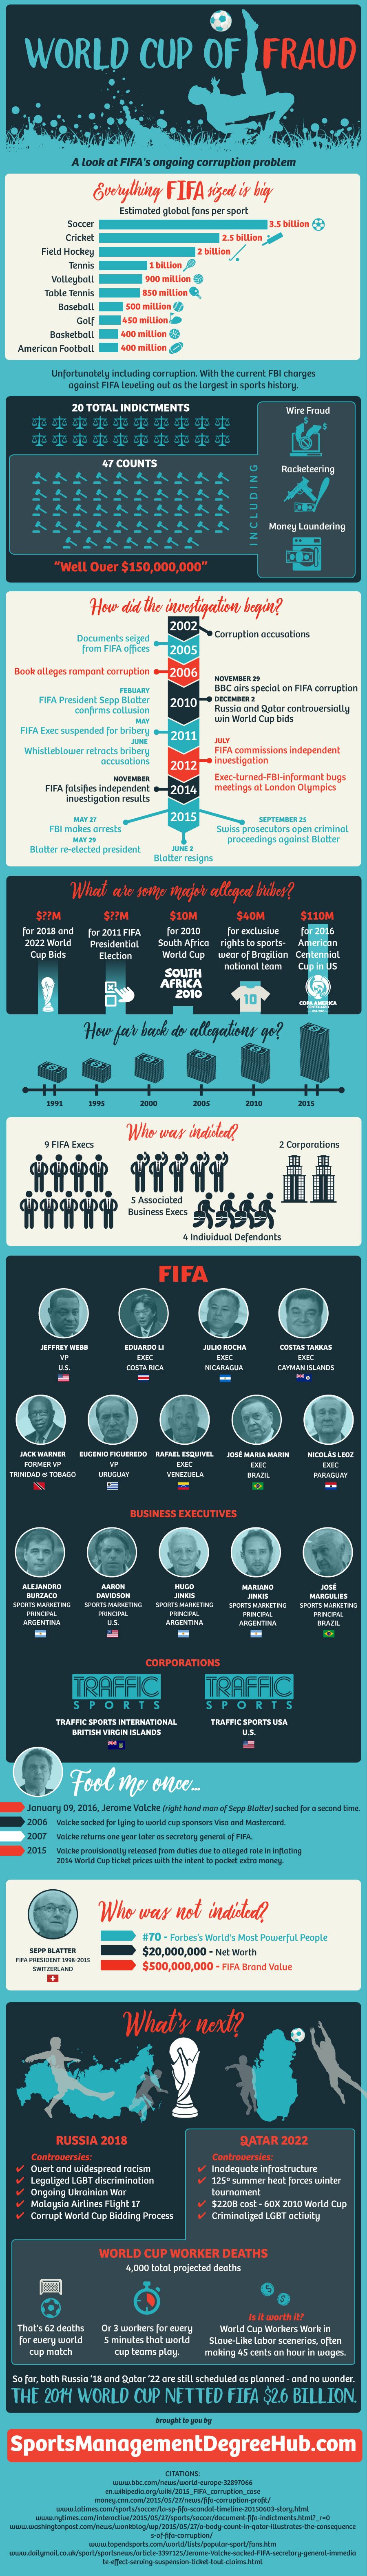 FIFA: A World Cup of Fraud